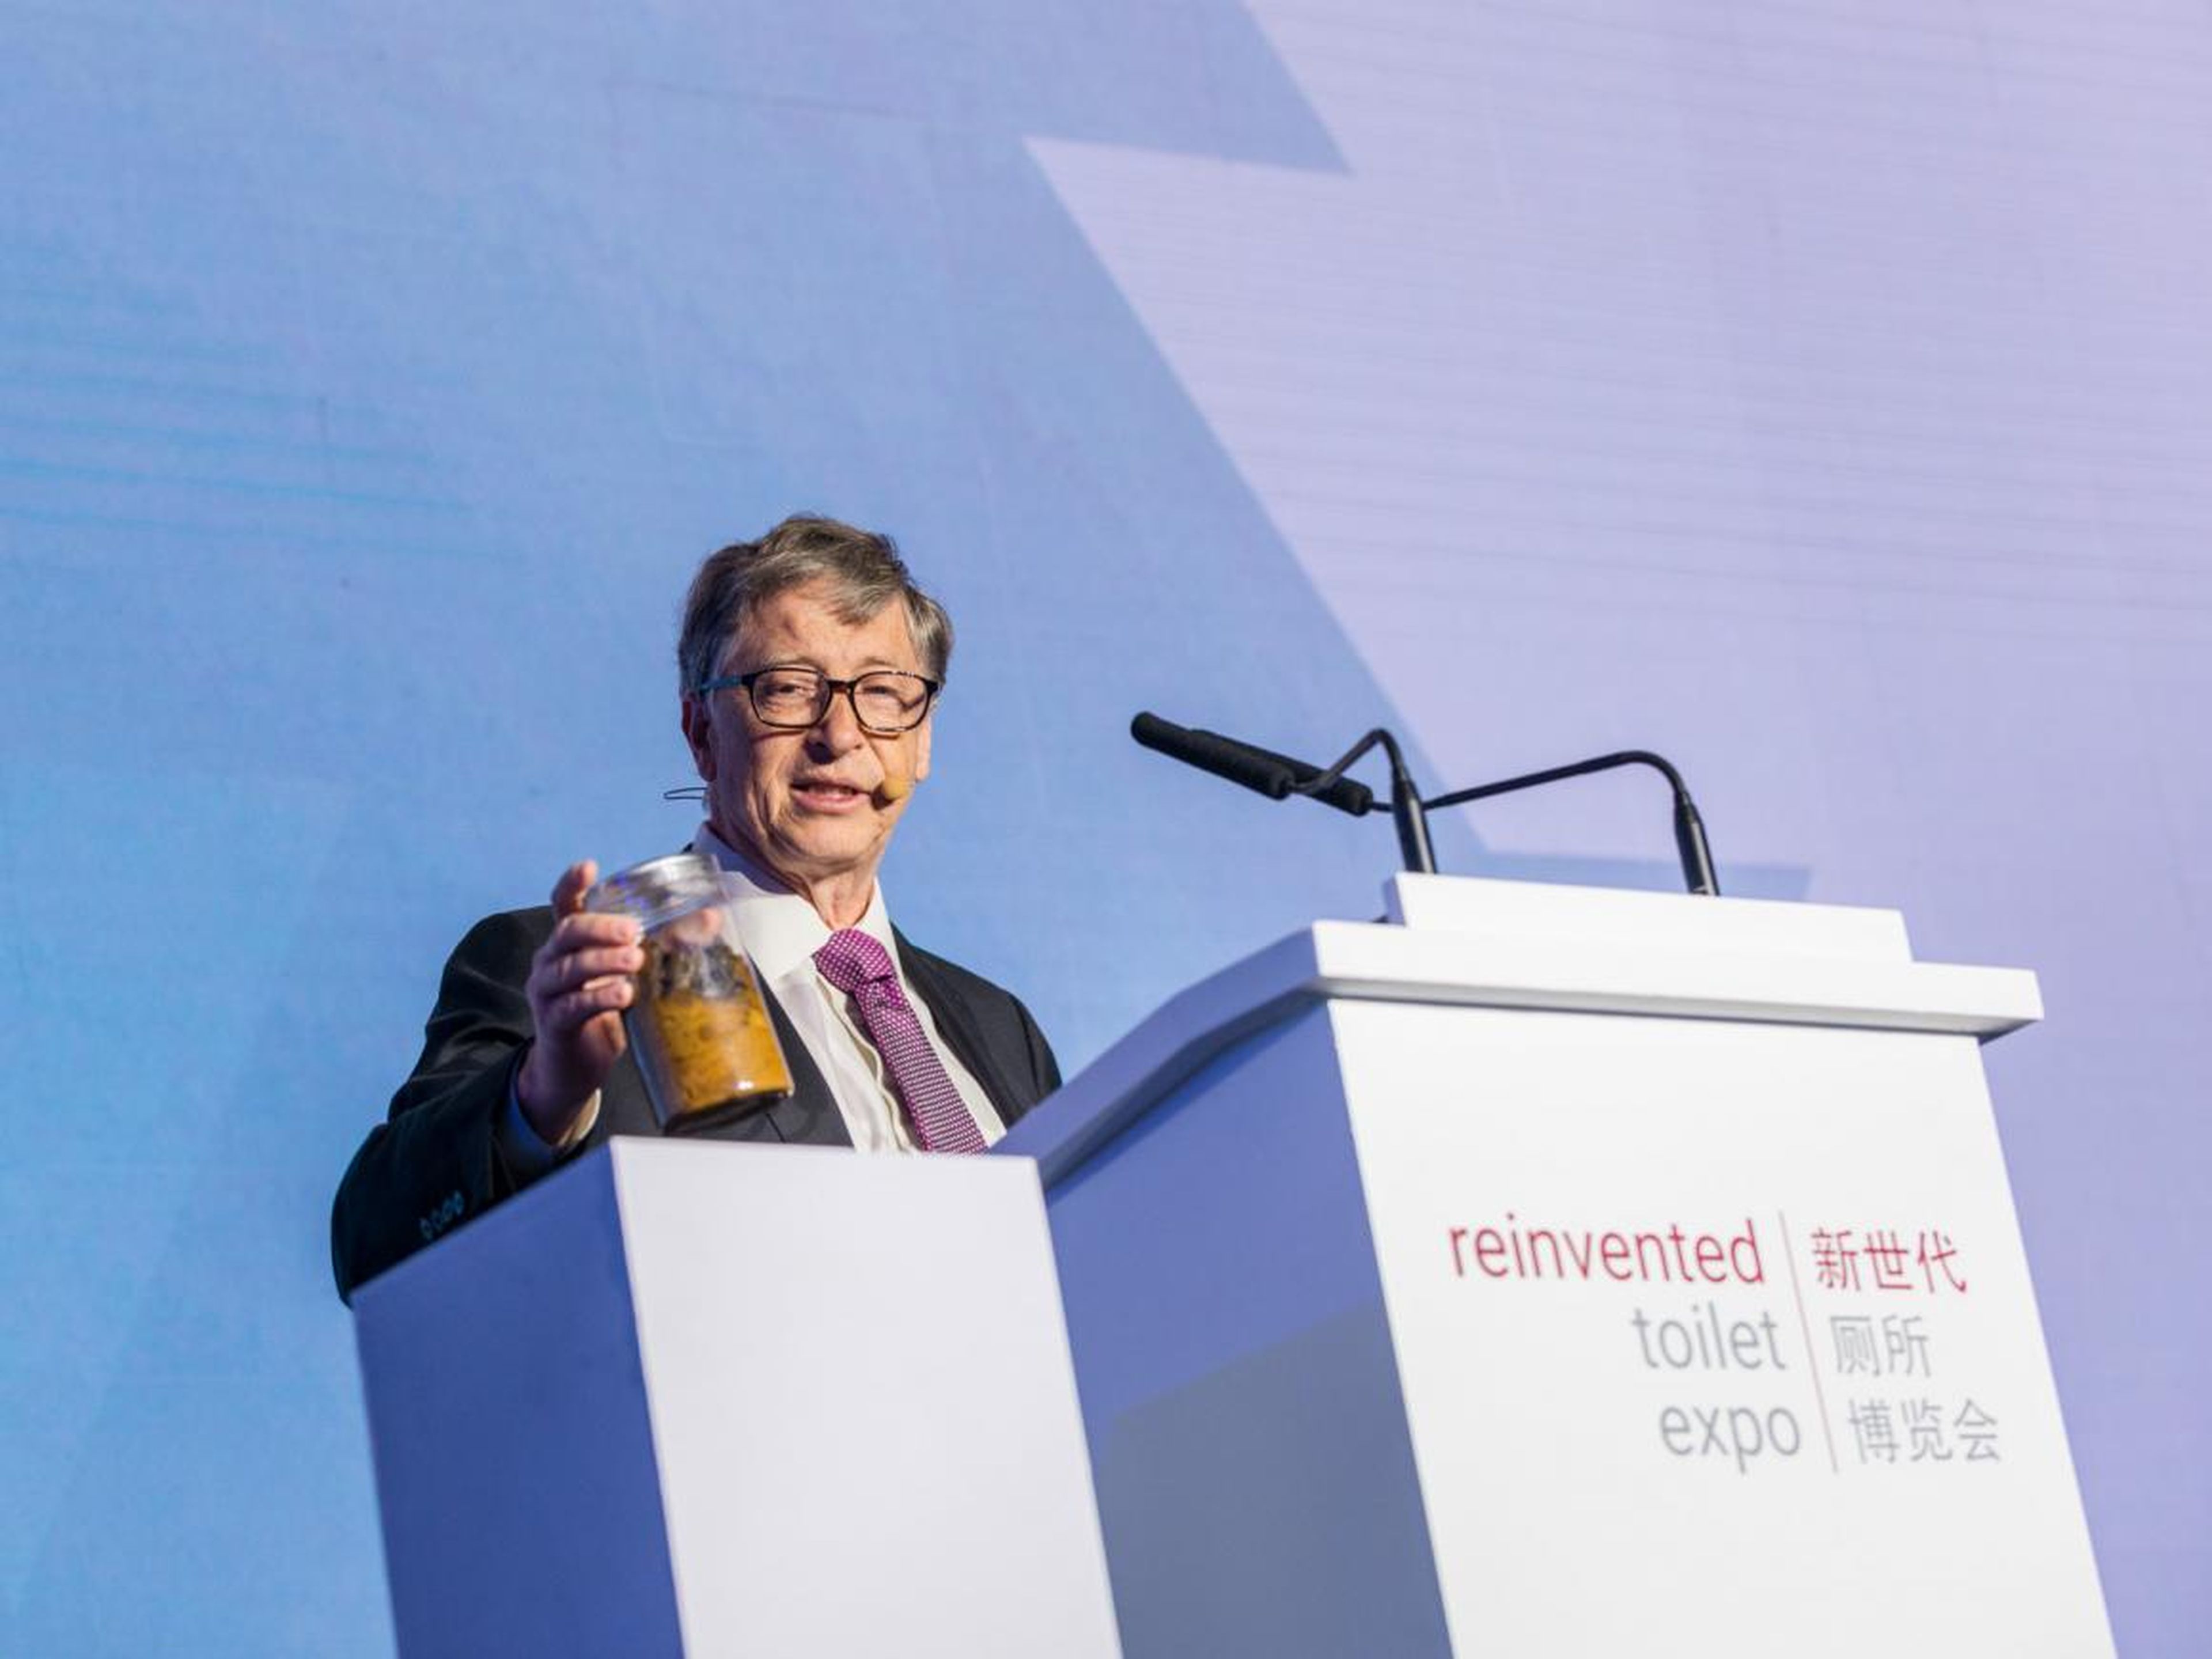 Bill Gates holds up a beaker of human feces at the Reinvented Toilet Expo in Beijing on November 6, 2018.